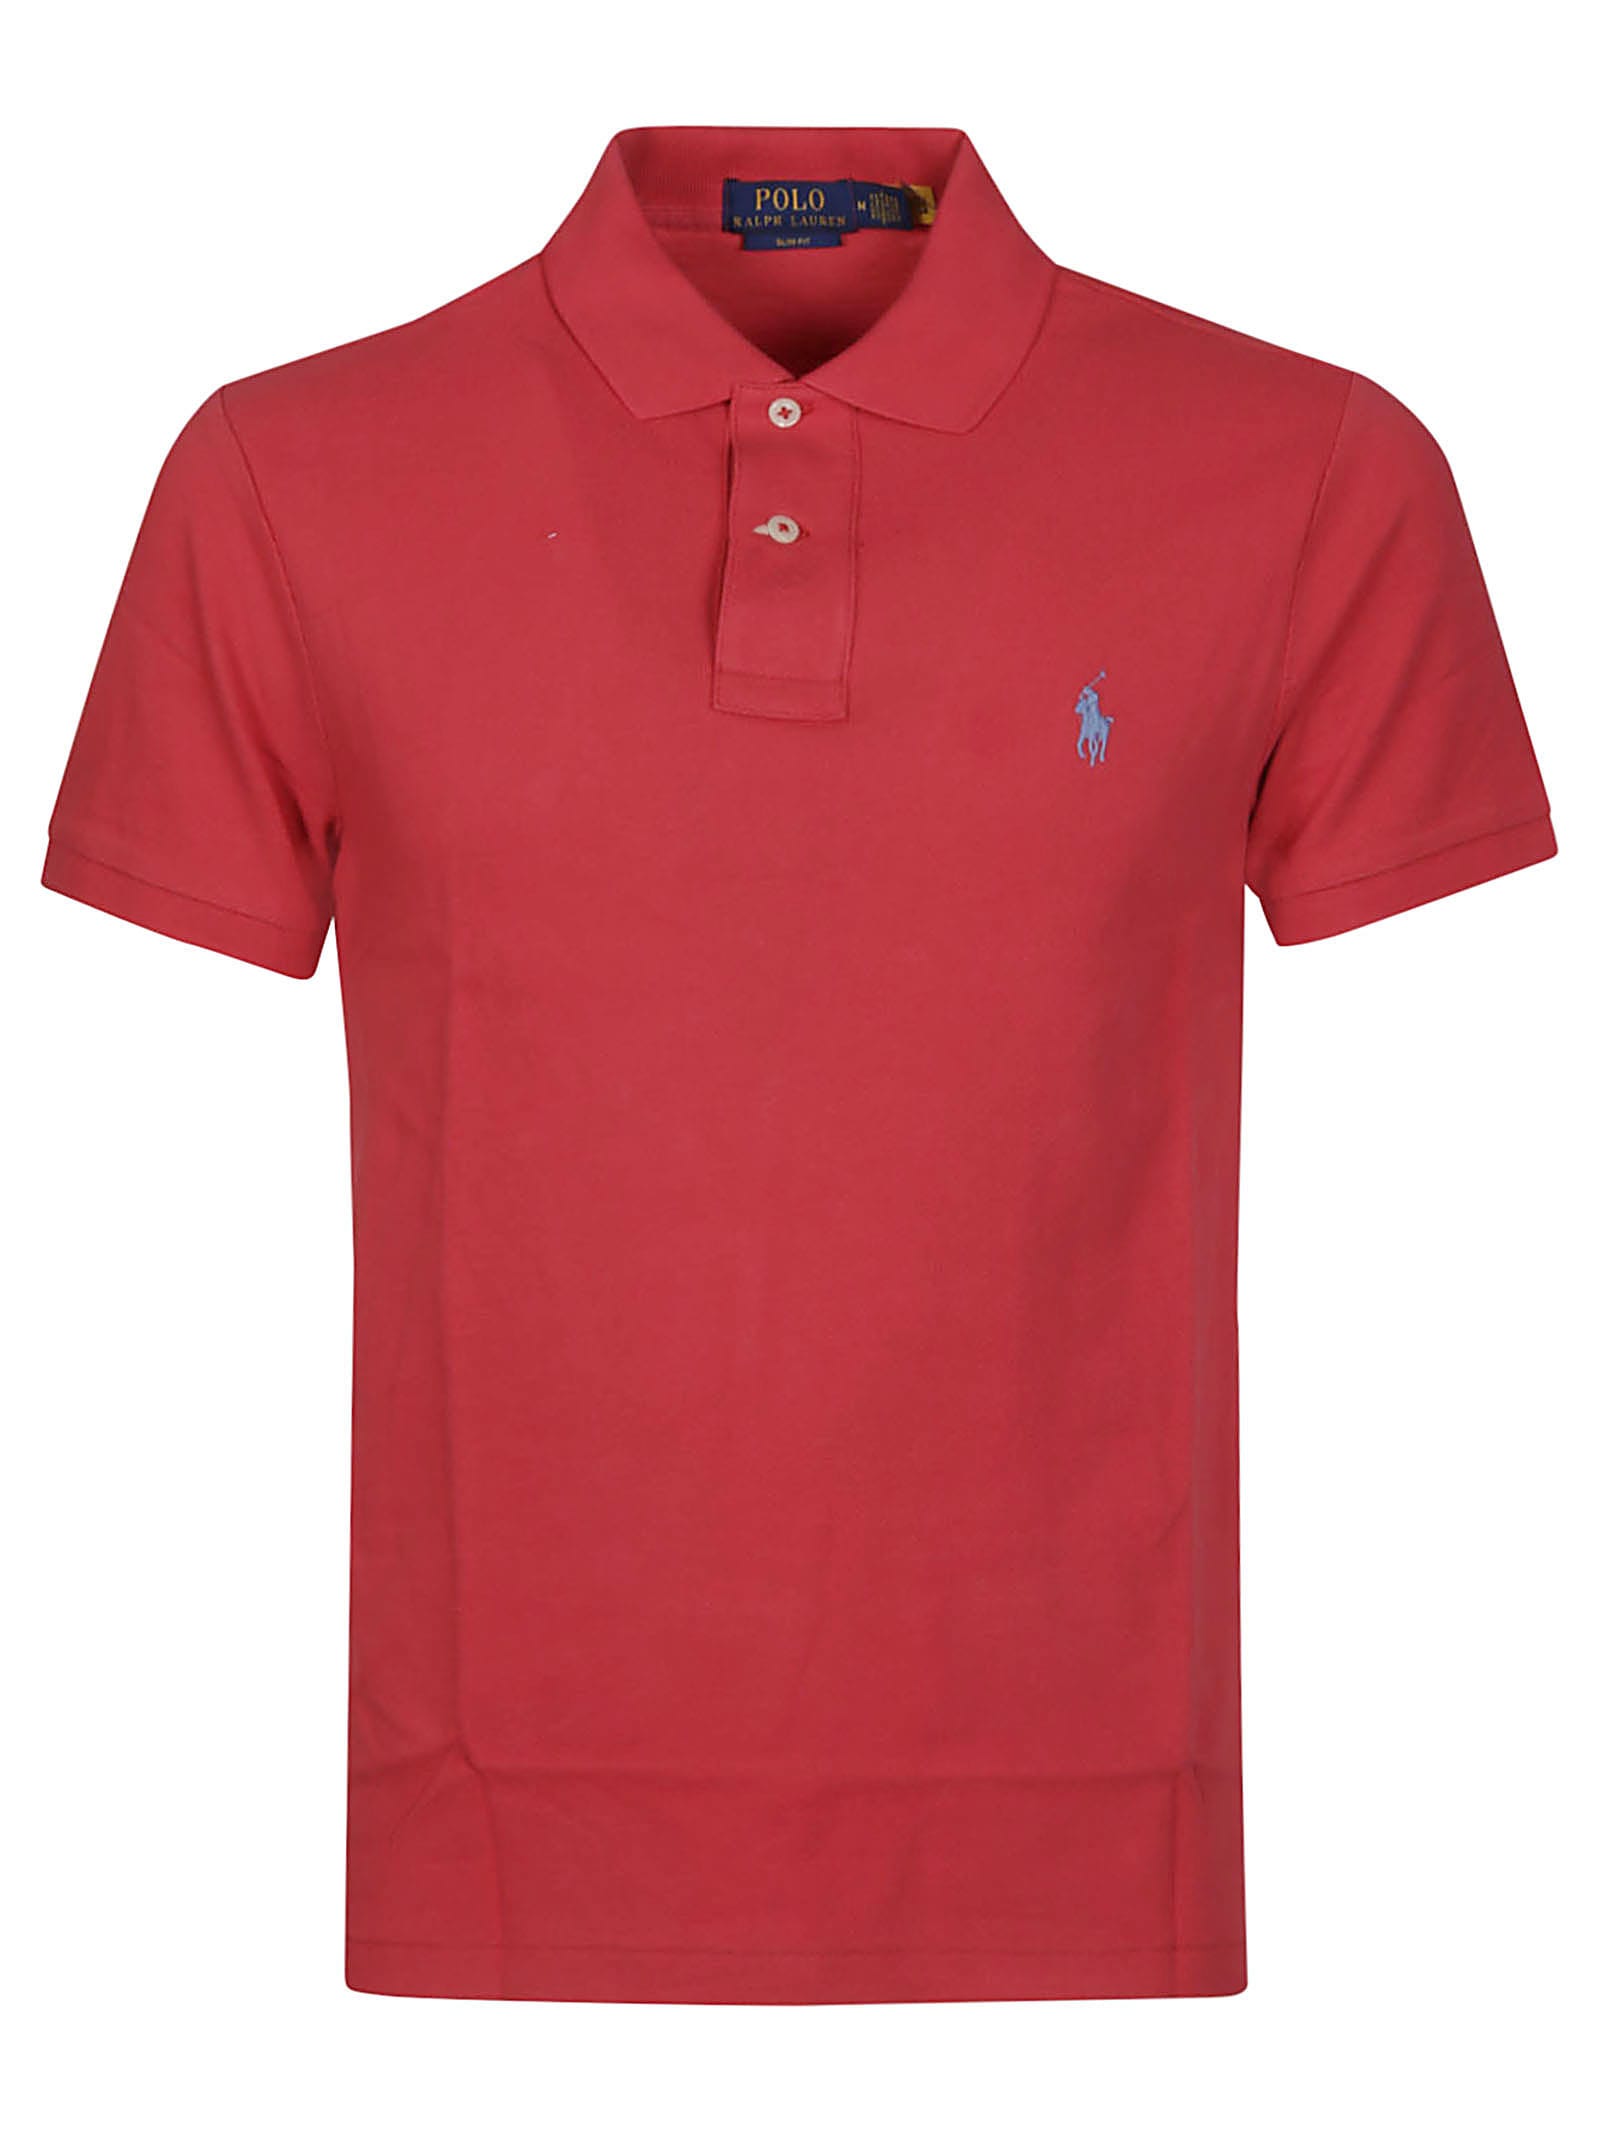 Polo Ralph Lauren Short Sleeve Slim Fit Polo Shirt In Nantucket Red